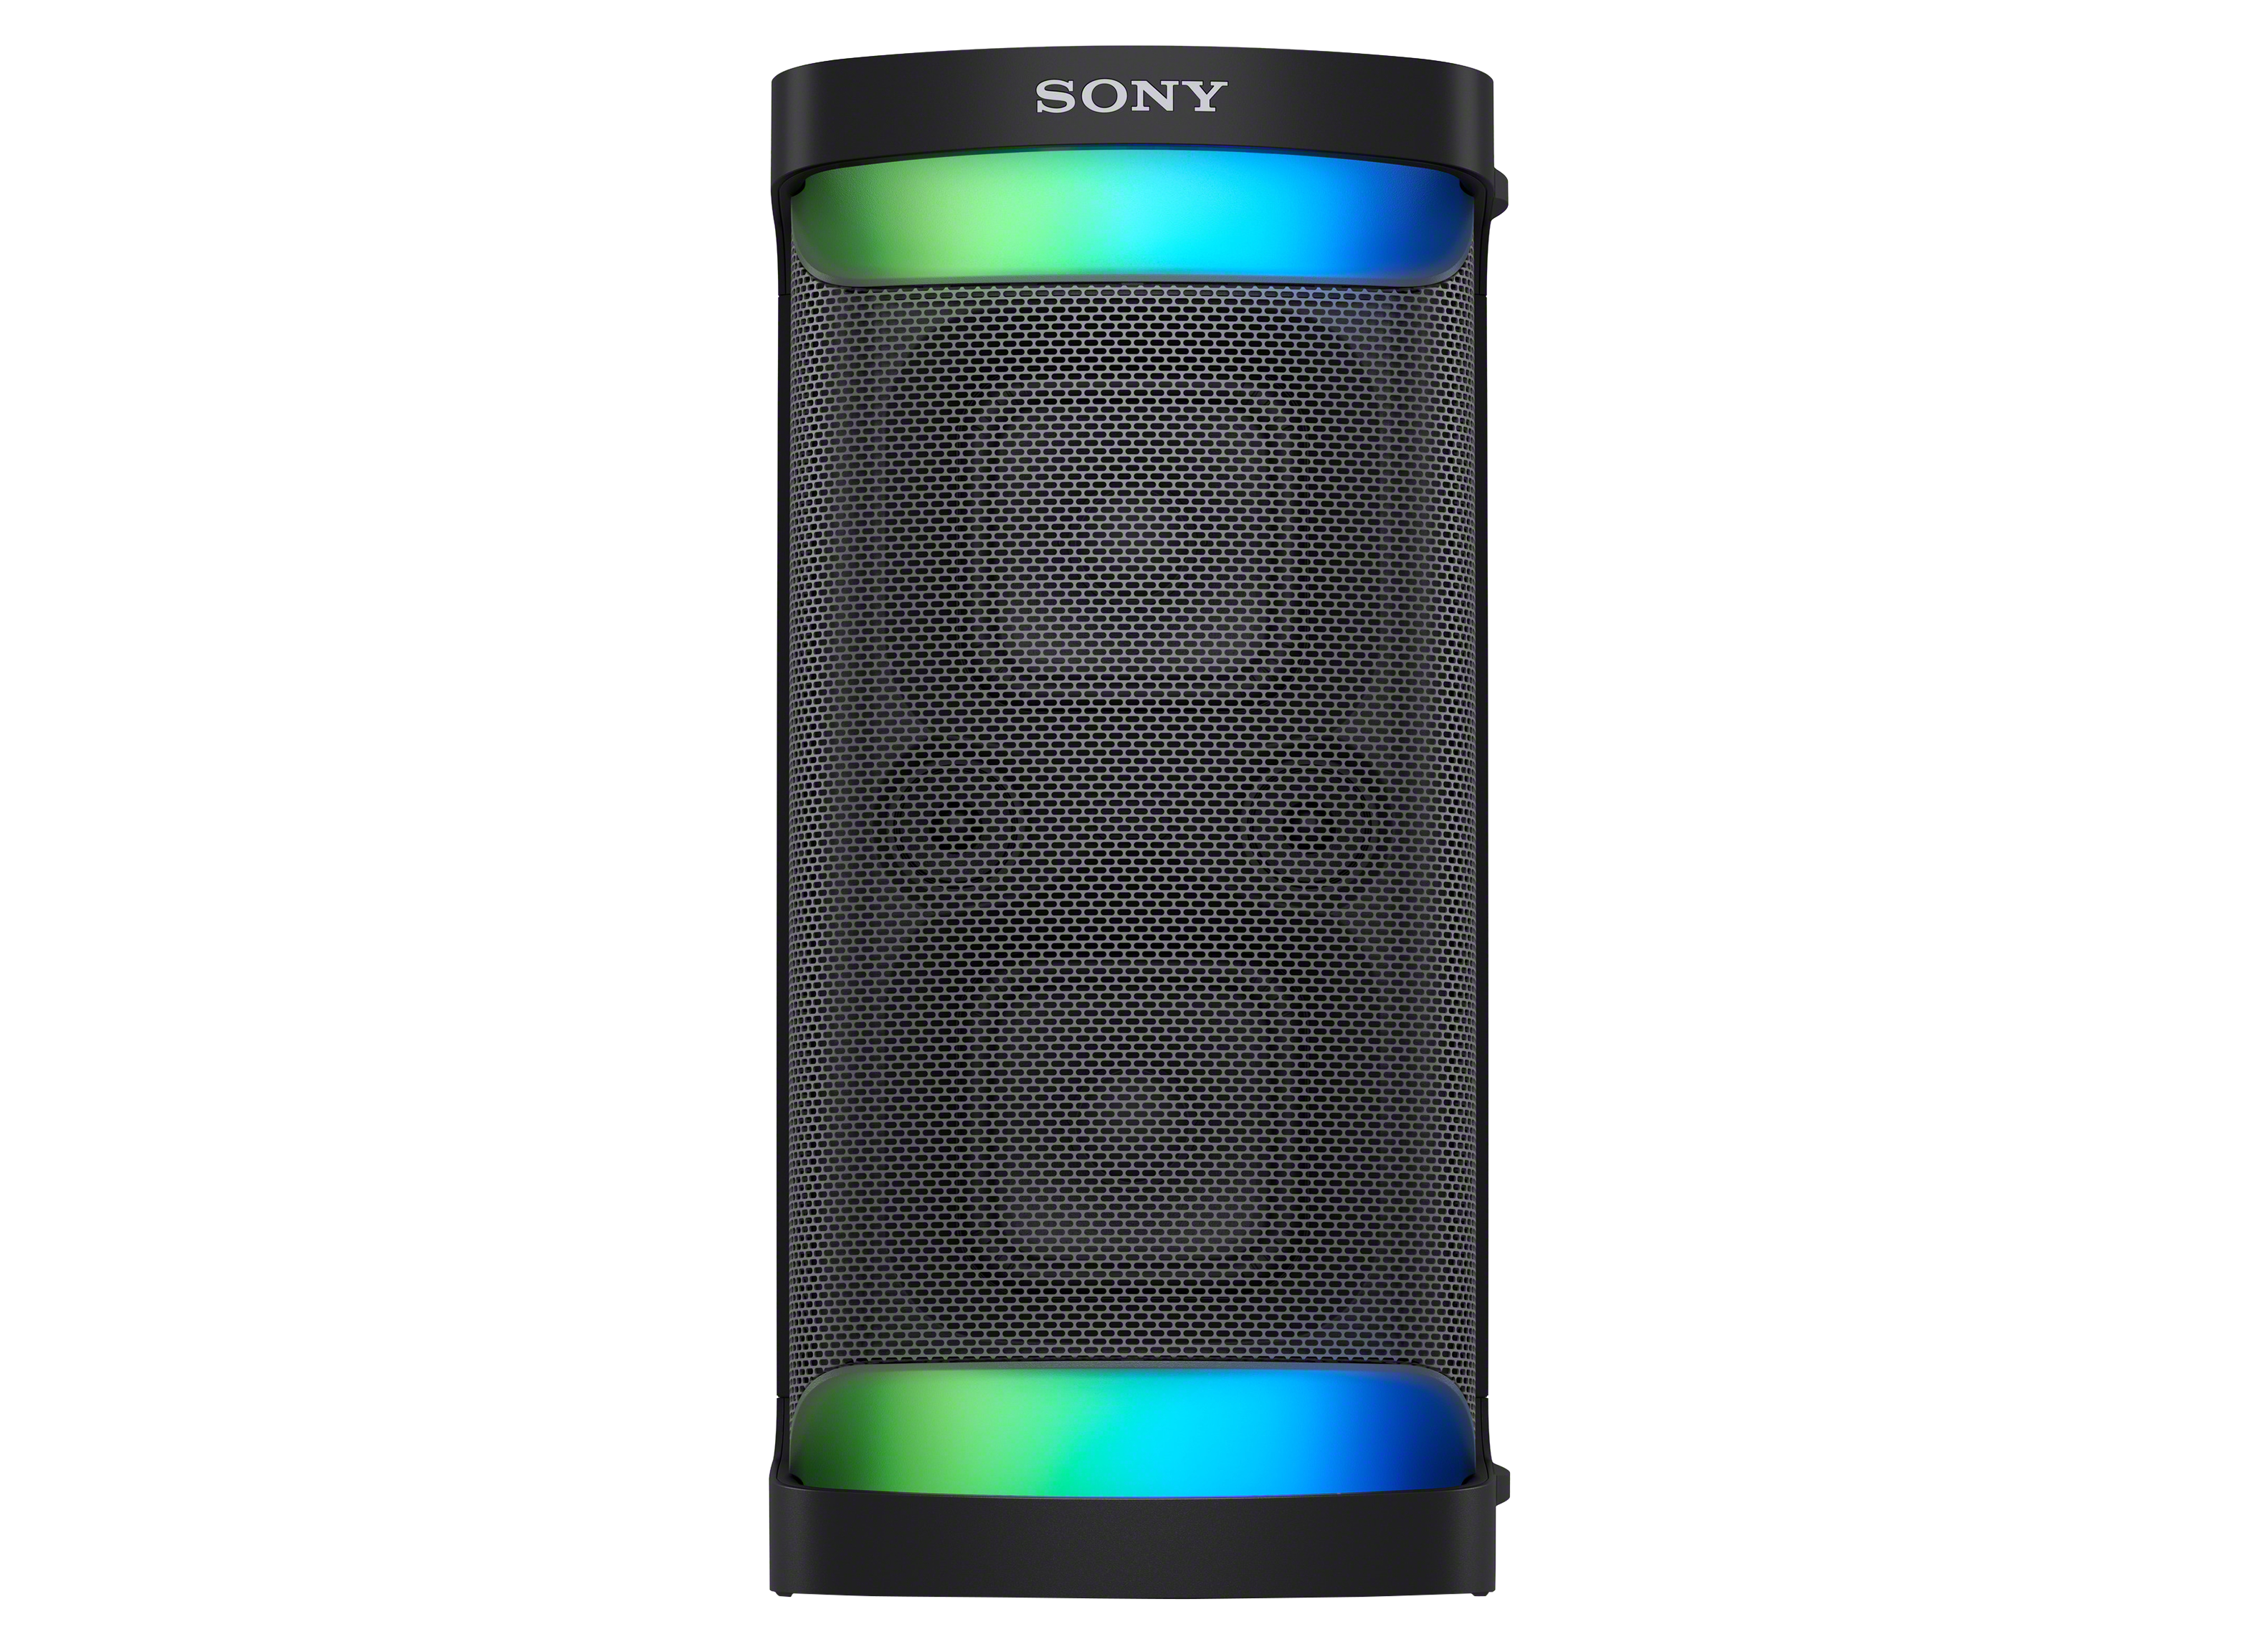 Wireless Review Reports - Sony Bluetooth Speaker SRS-XP500 & Consumer